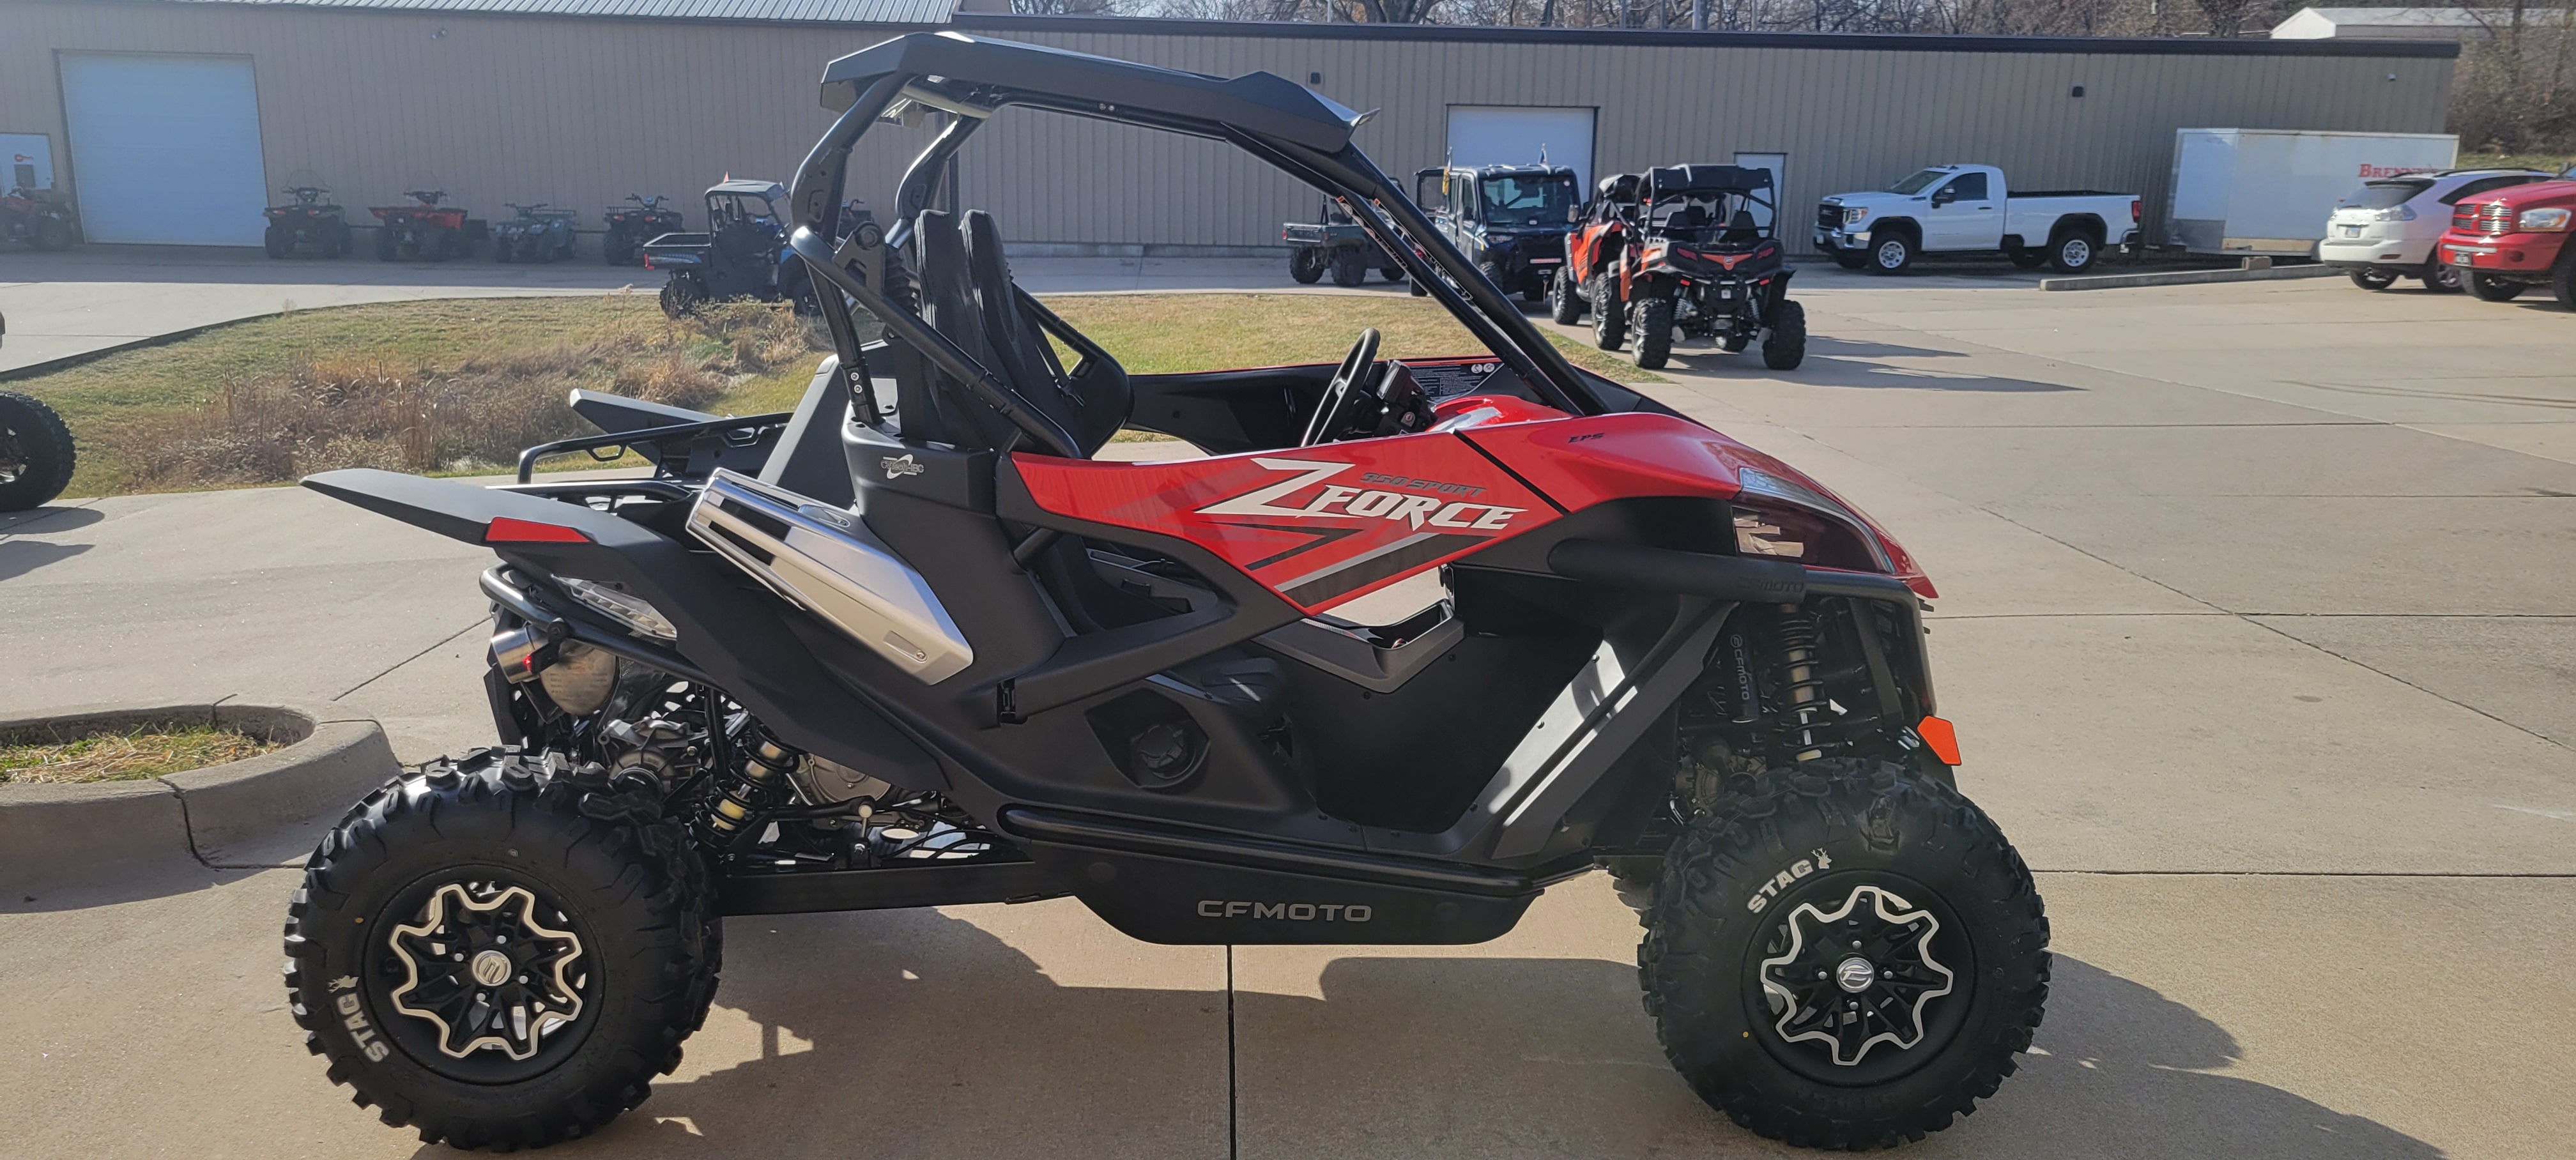 2022 CFMOTO ZFORCE 950 Sport at Brenny's Motorcycle Clinic, Bettendorf, IA 52722